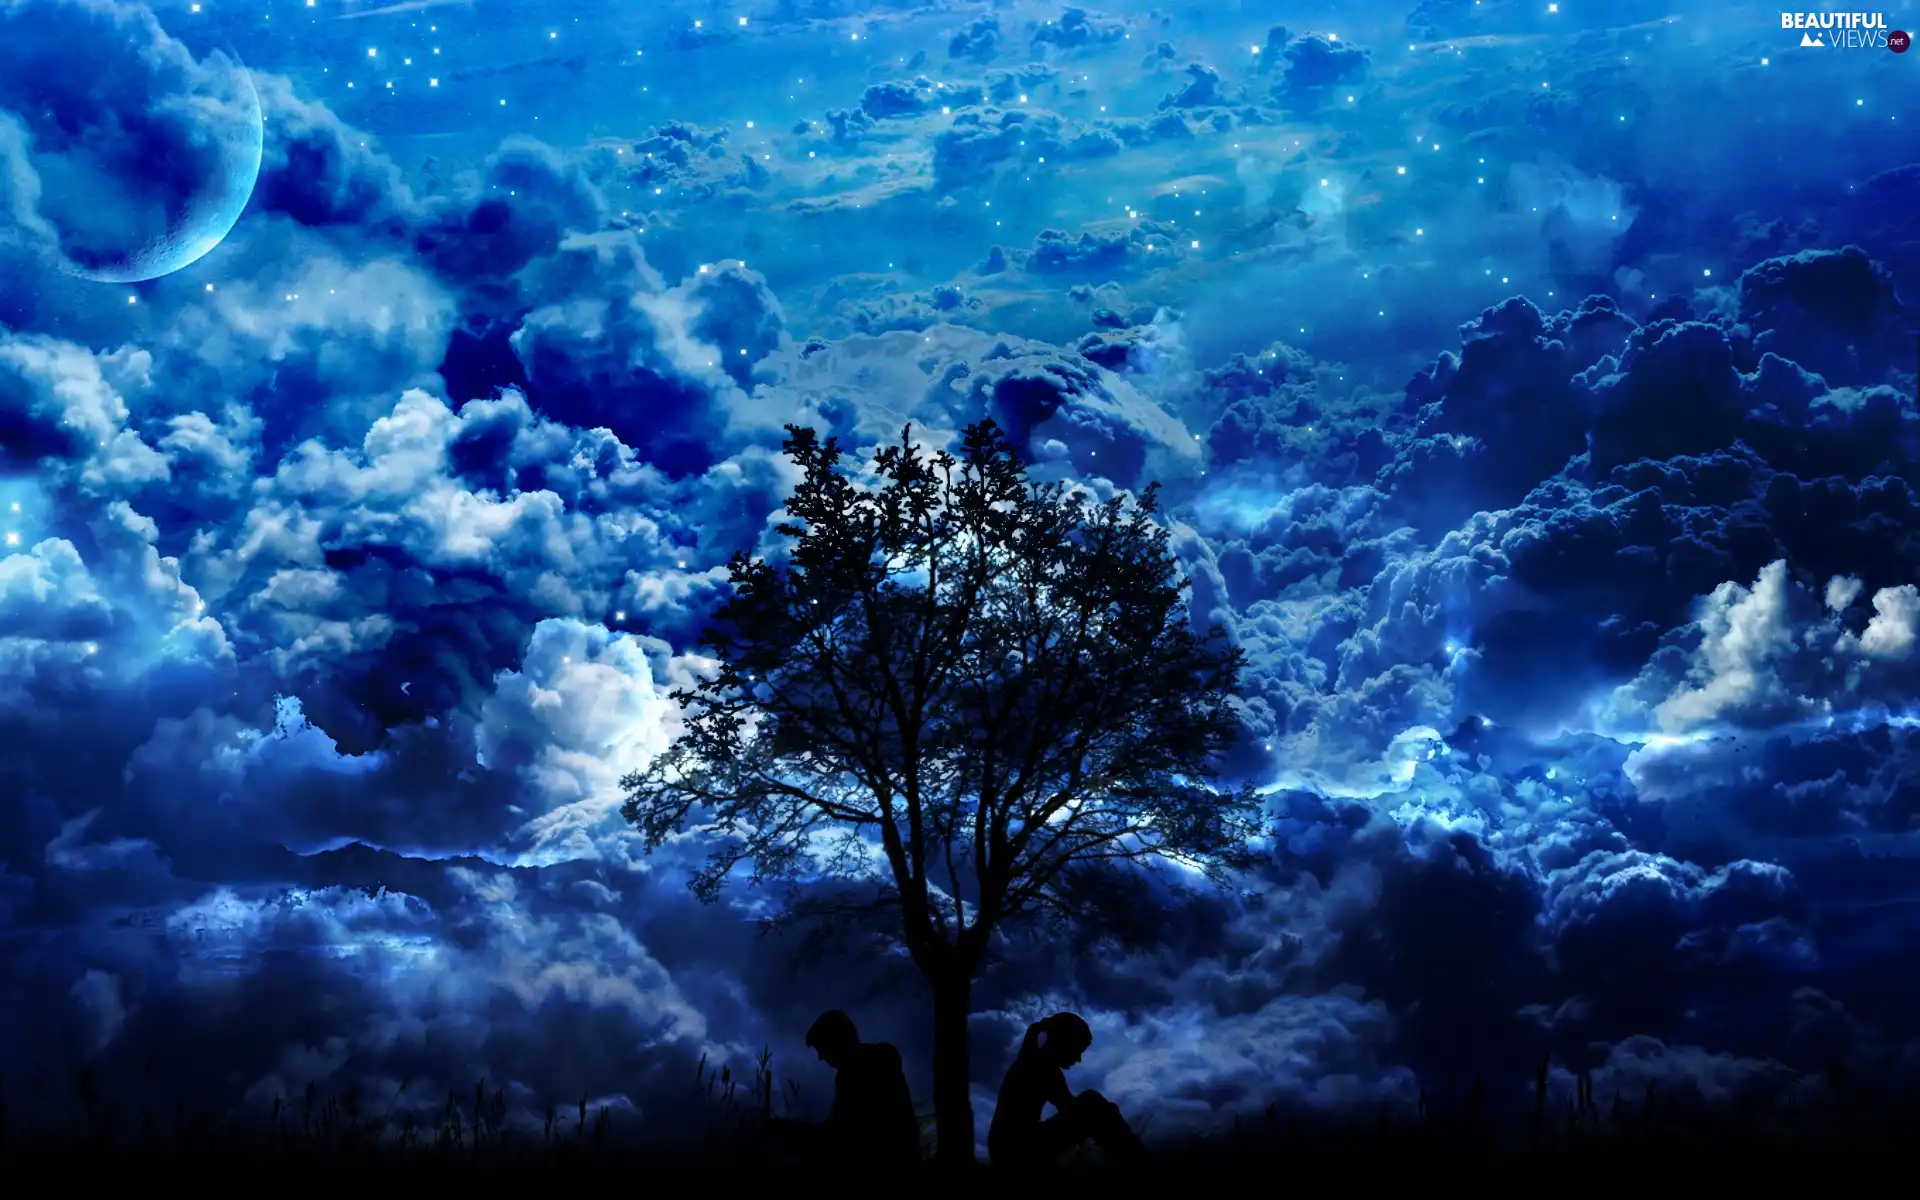 clouds, People, Night, trees